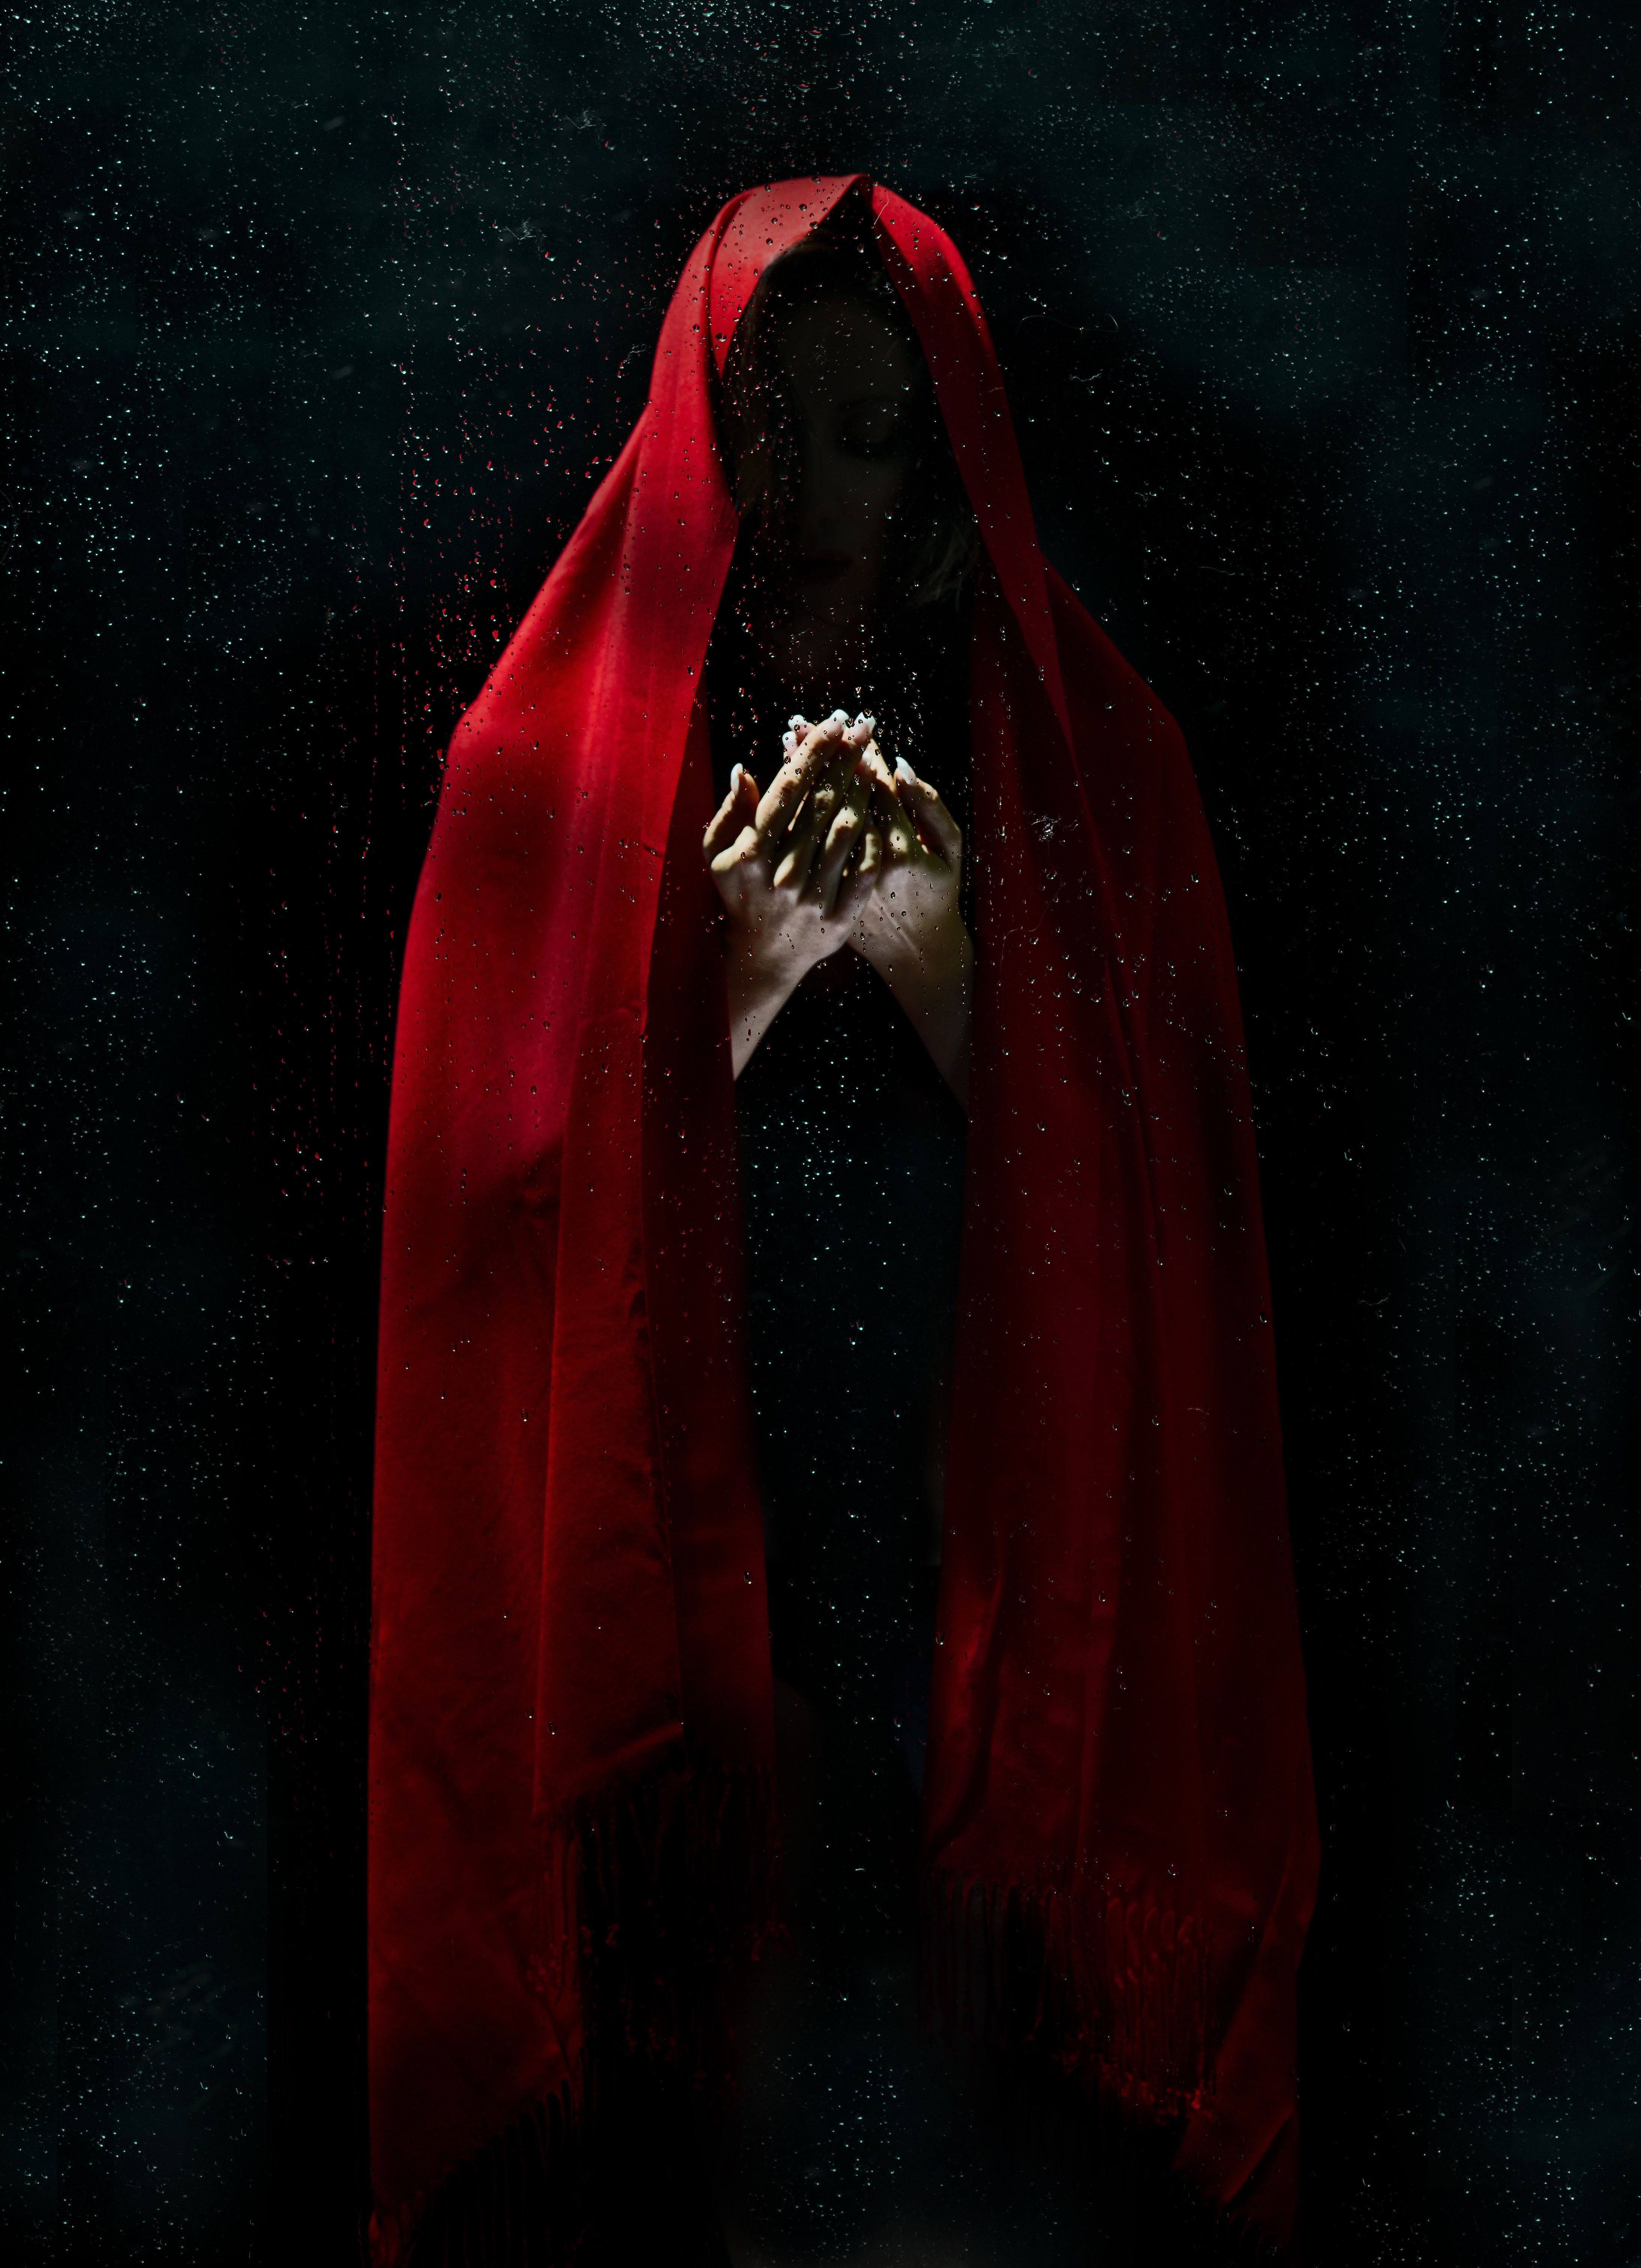 A woman in a red hooded cloak, her hands clasped in front of her. - Creepy, horror